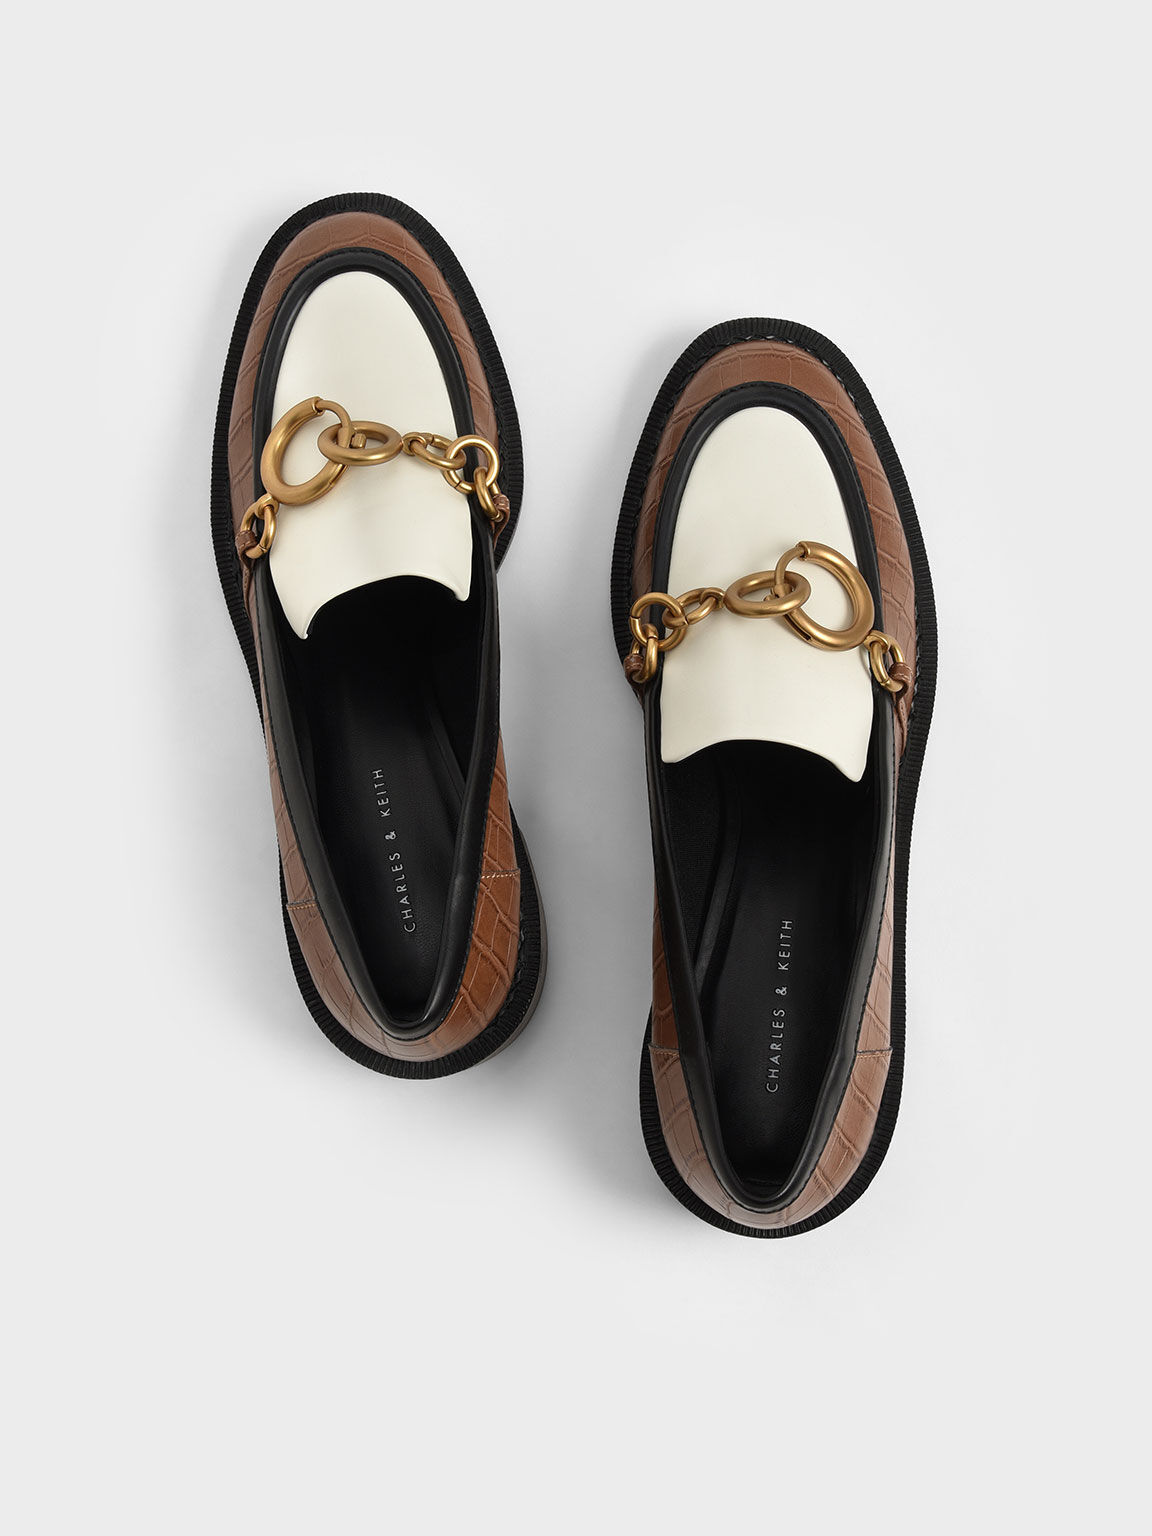 Croc-Effect Chain Link Loafers, Multi, hi-res